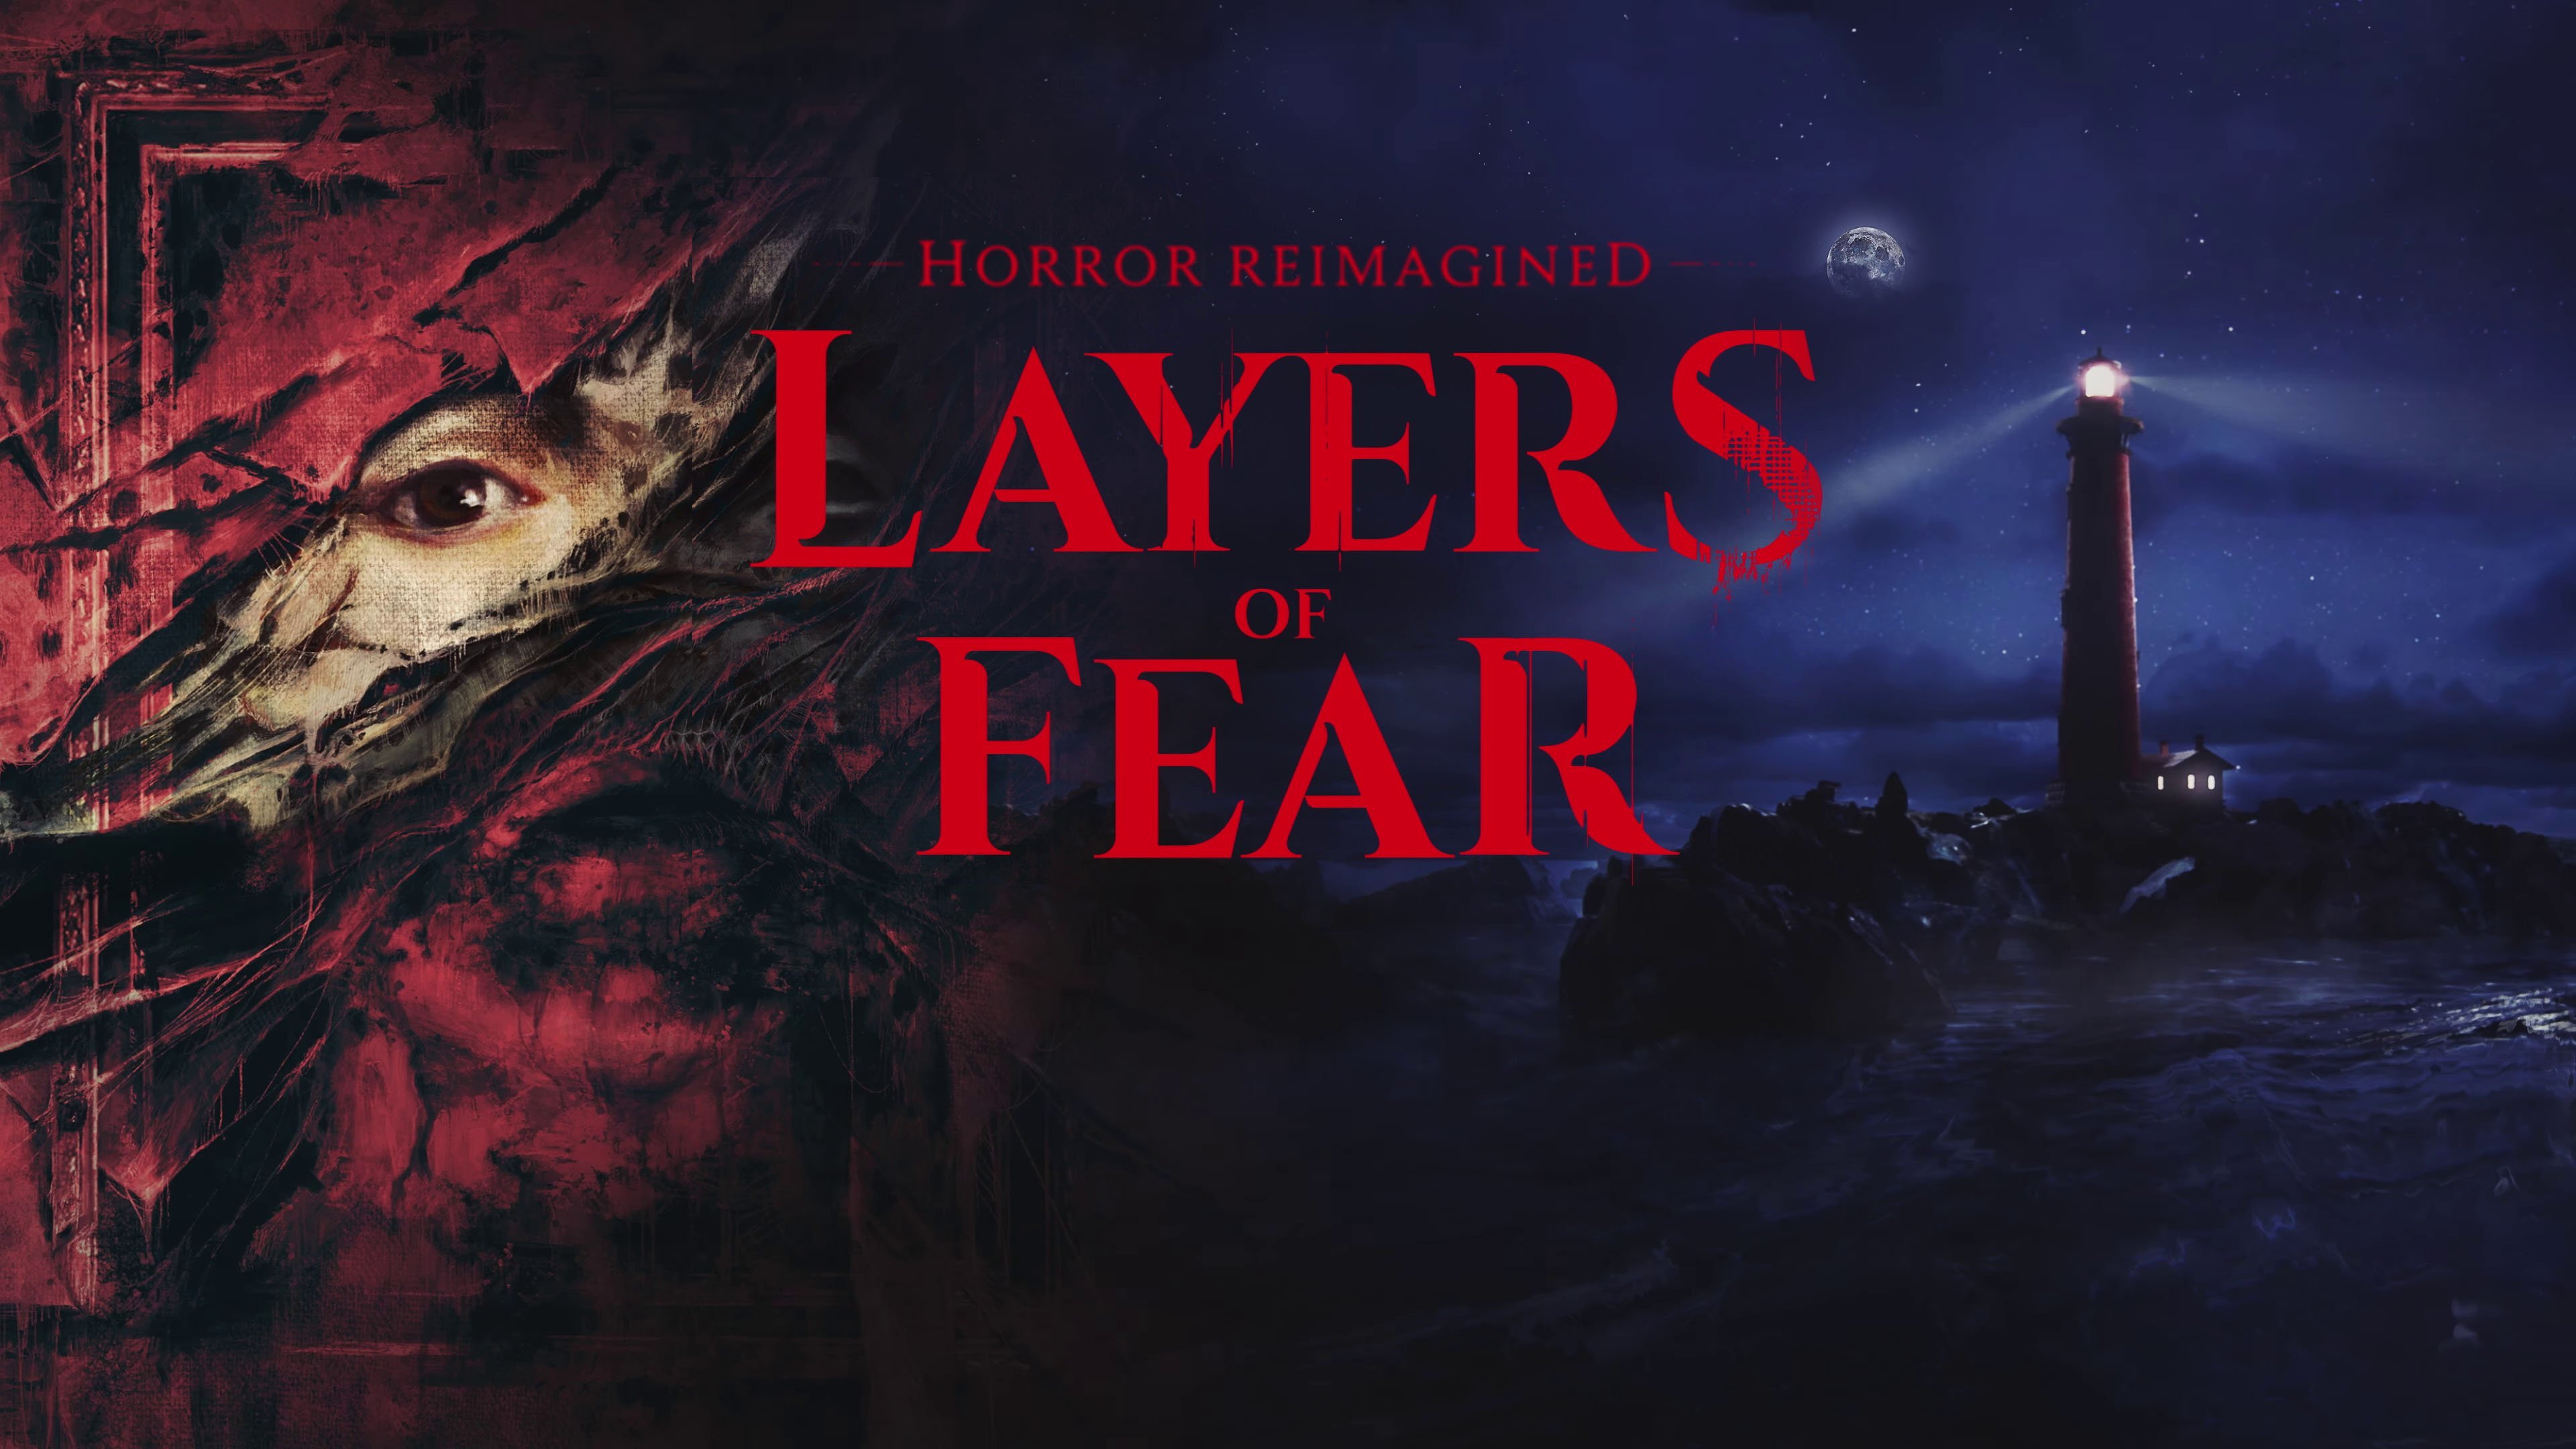 Layers of Fears is set to release in June